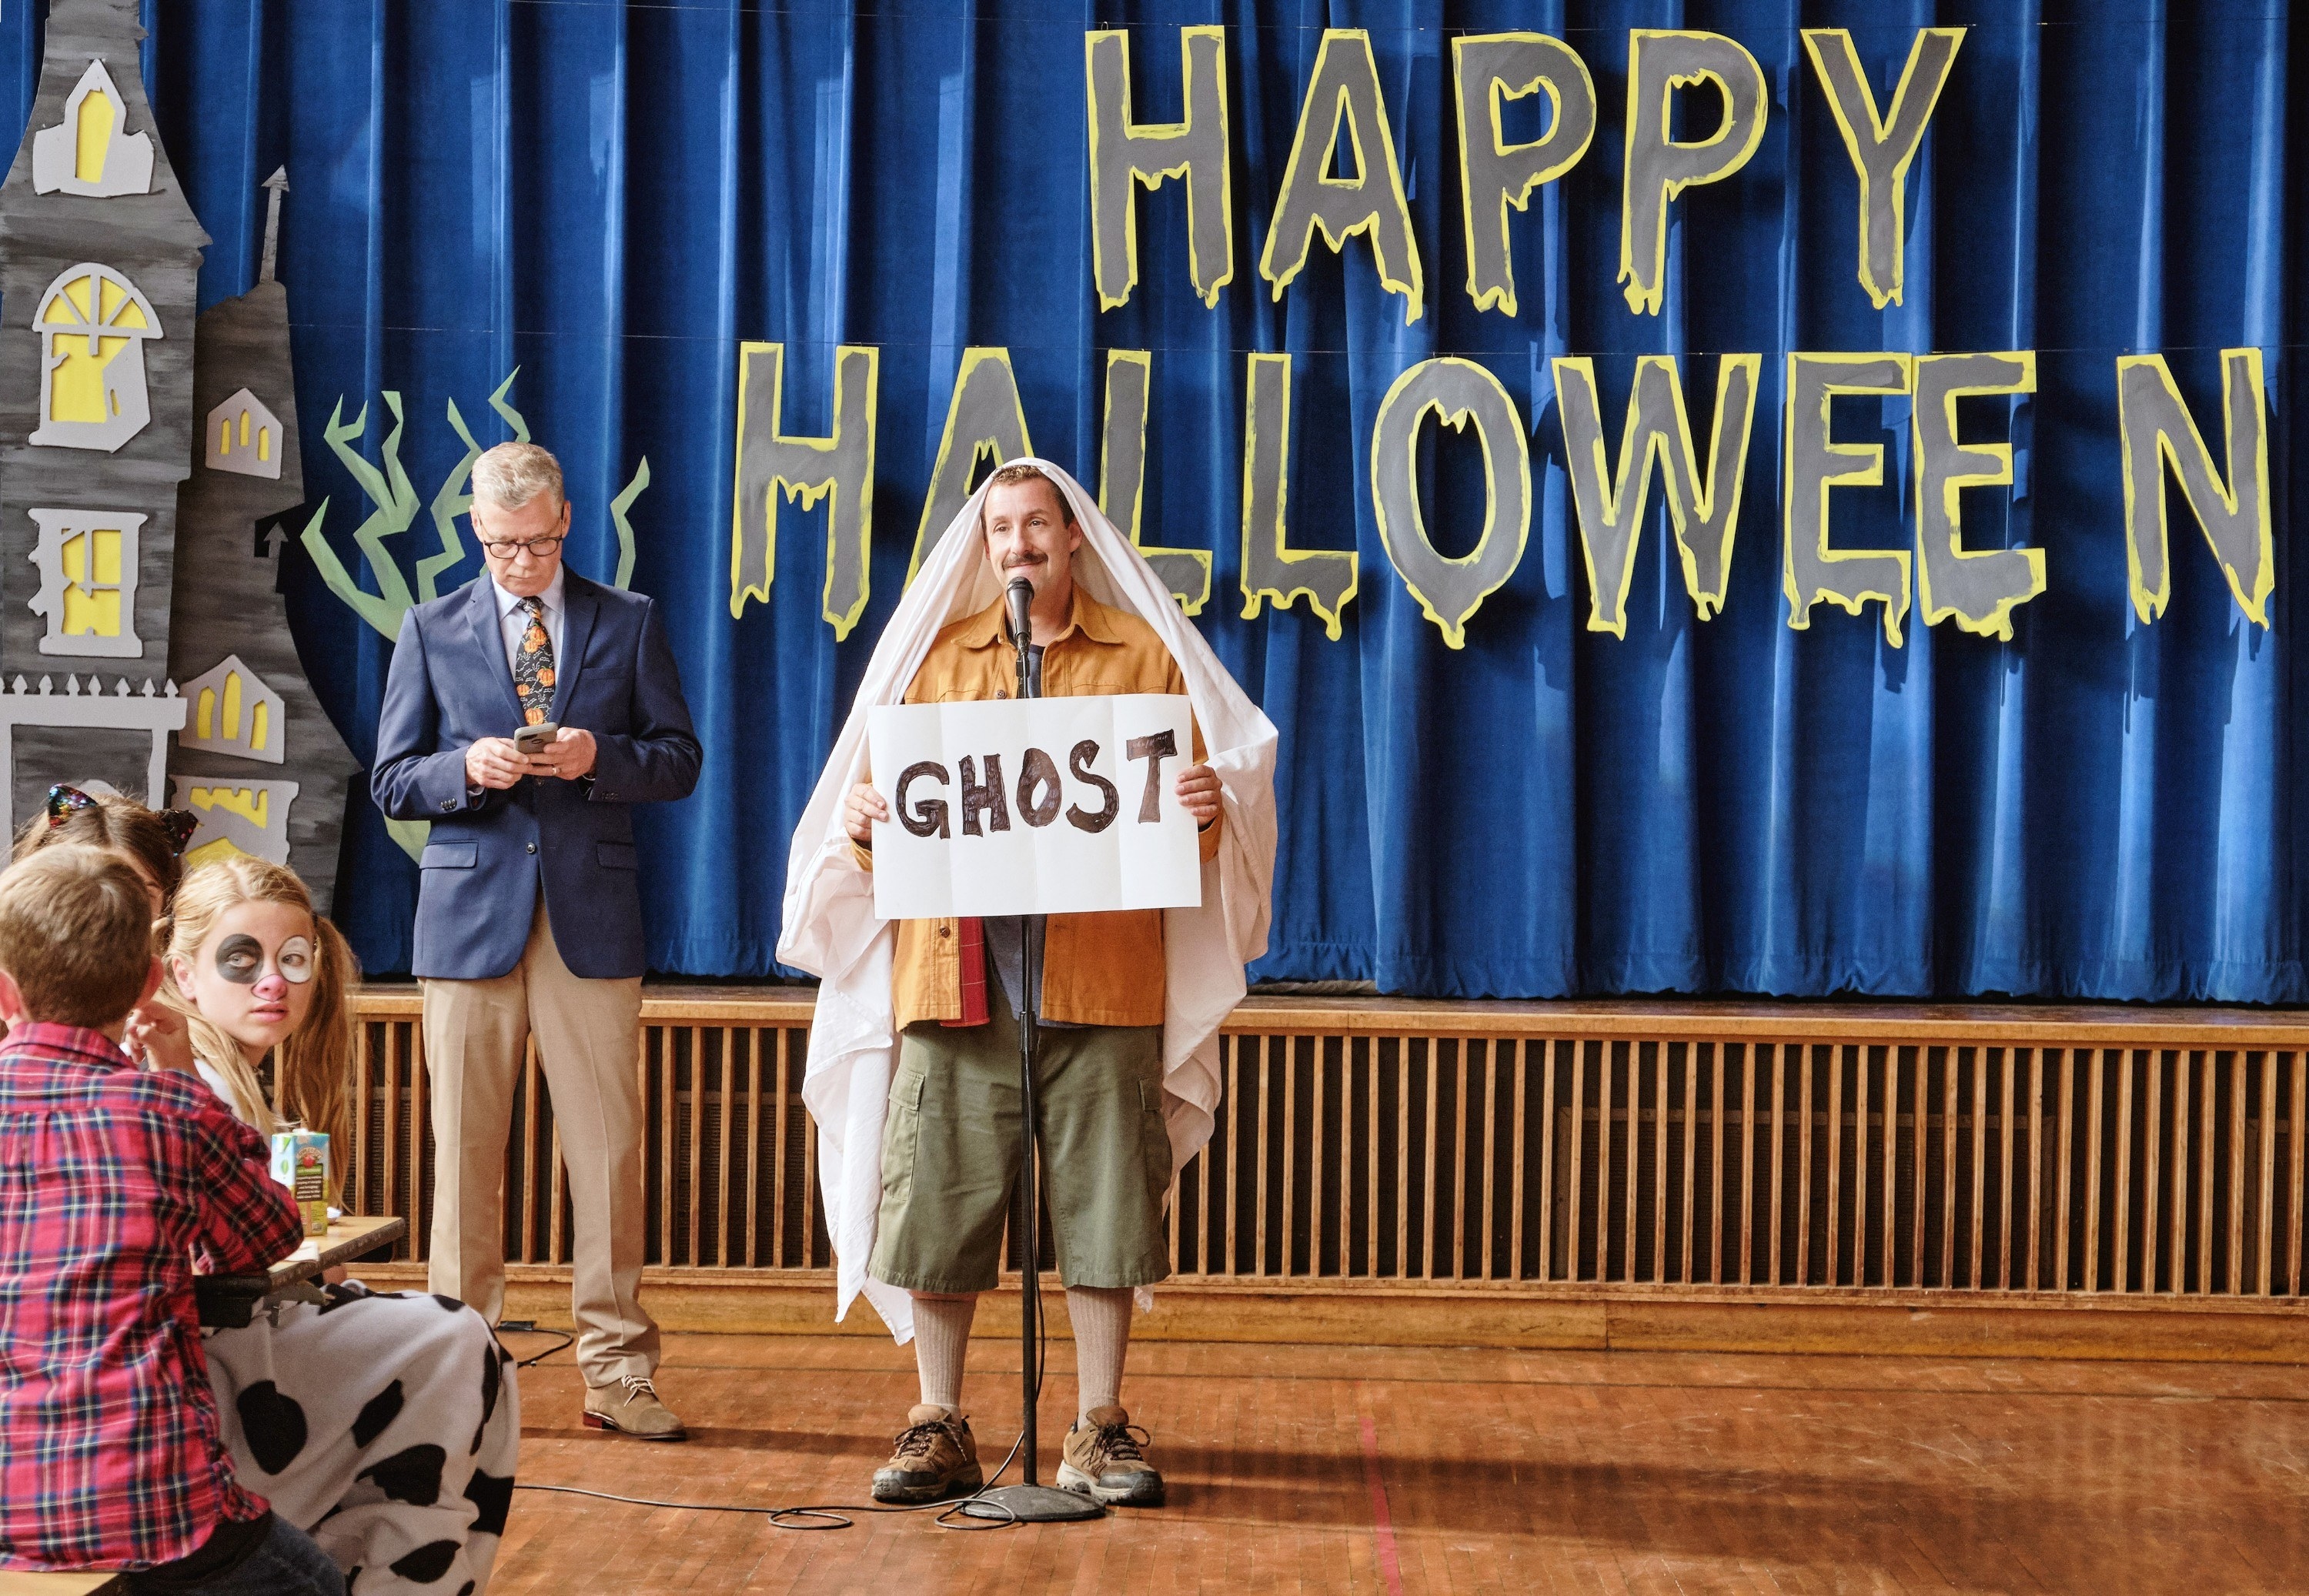 Adam Sandler stands in the front of a school assembly dressed like a ghost